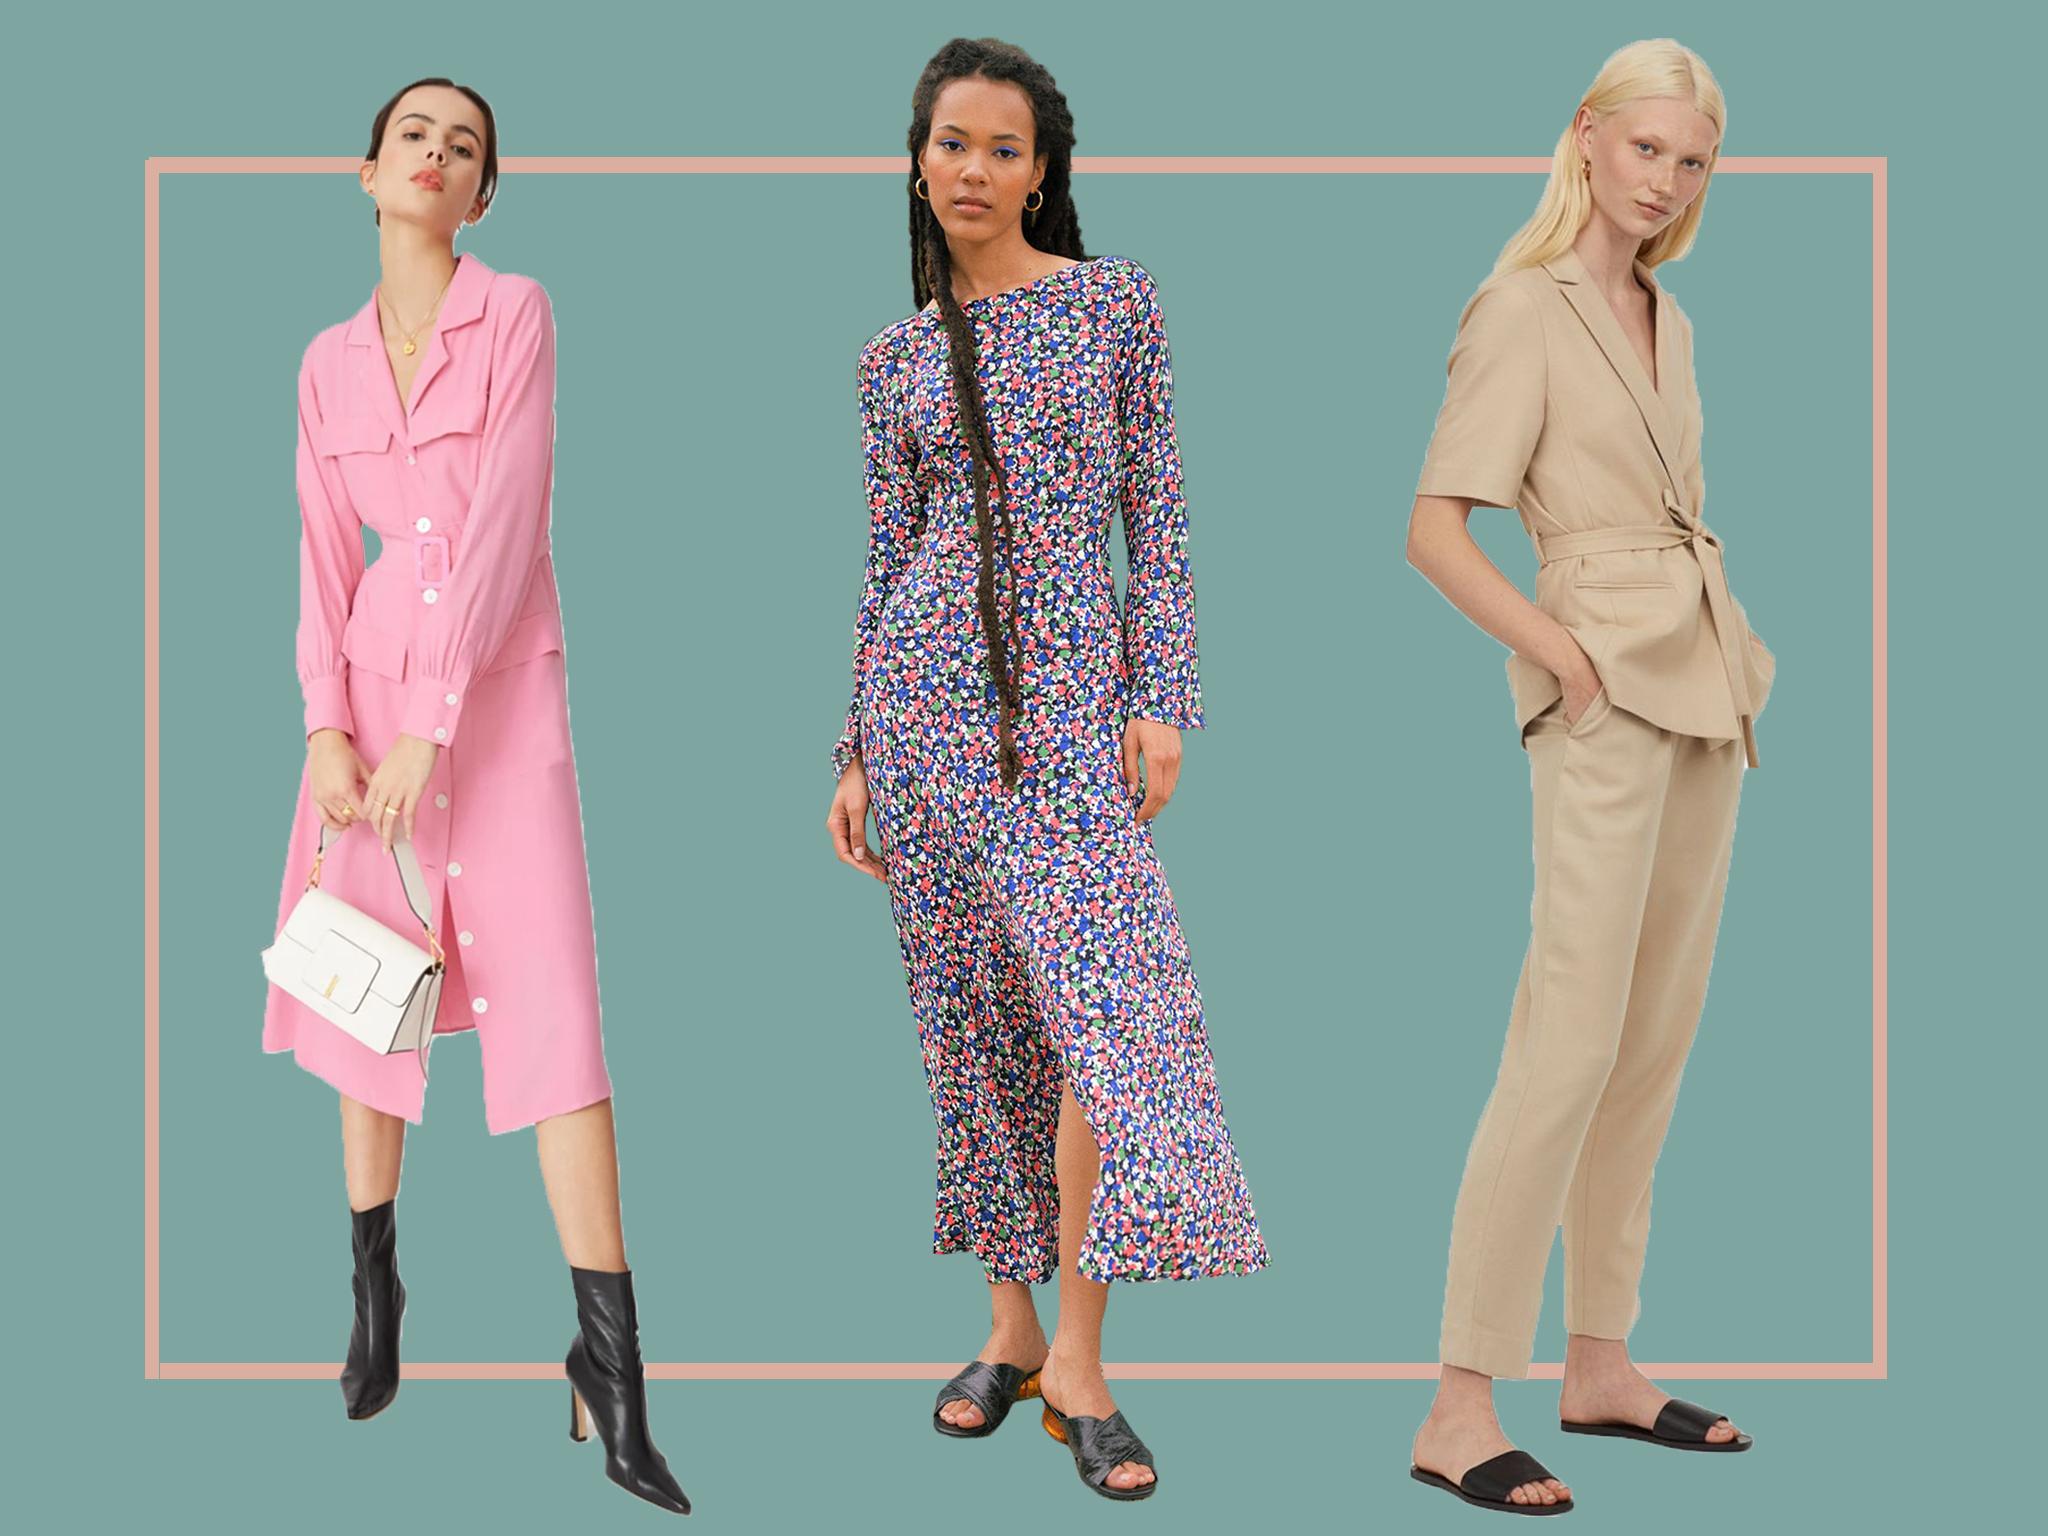 Workwear essentials: The staples you need for returning to the office ...